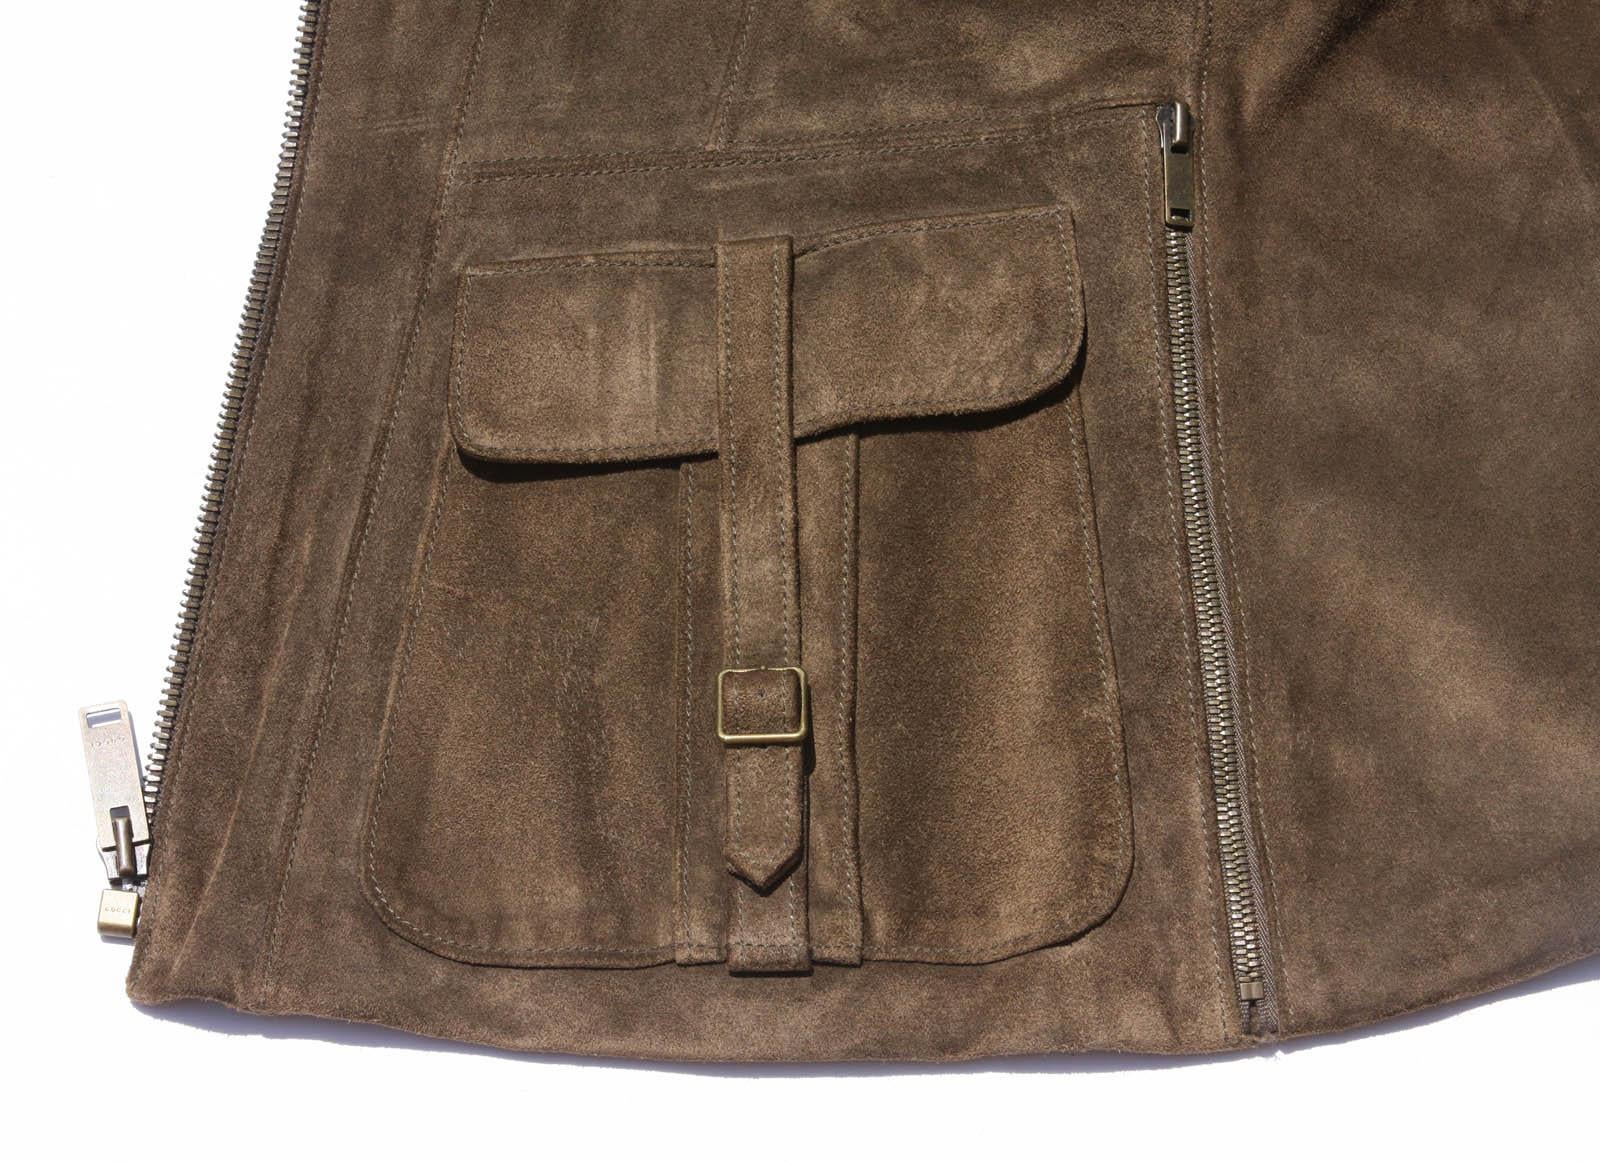 Tom Ford for Gucci Men's Runway Leather Western Jacket, S / S 2004  2